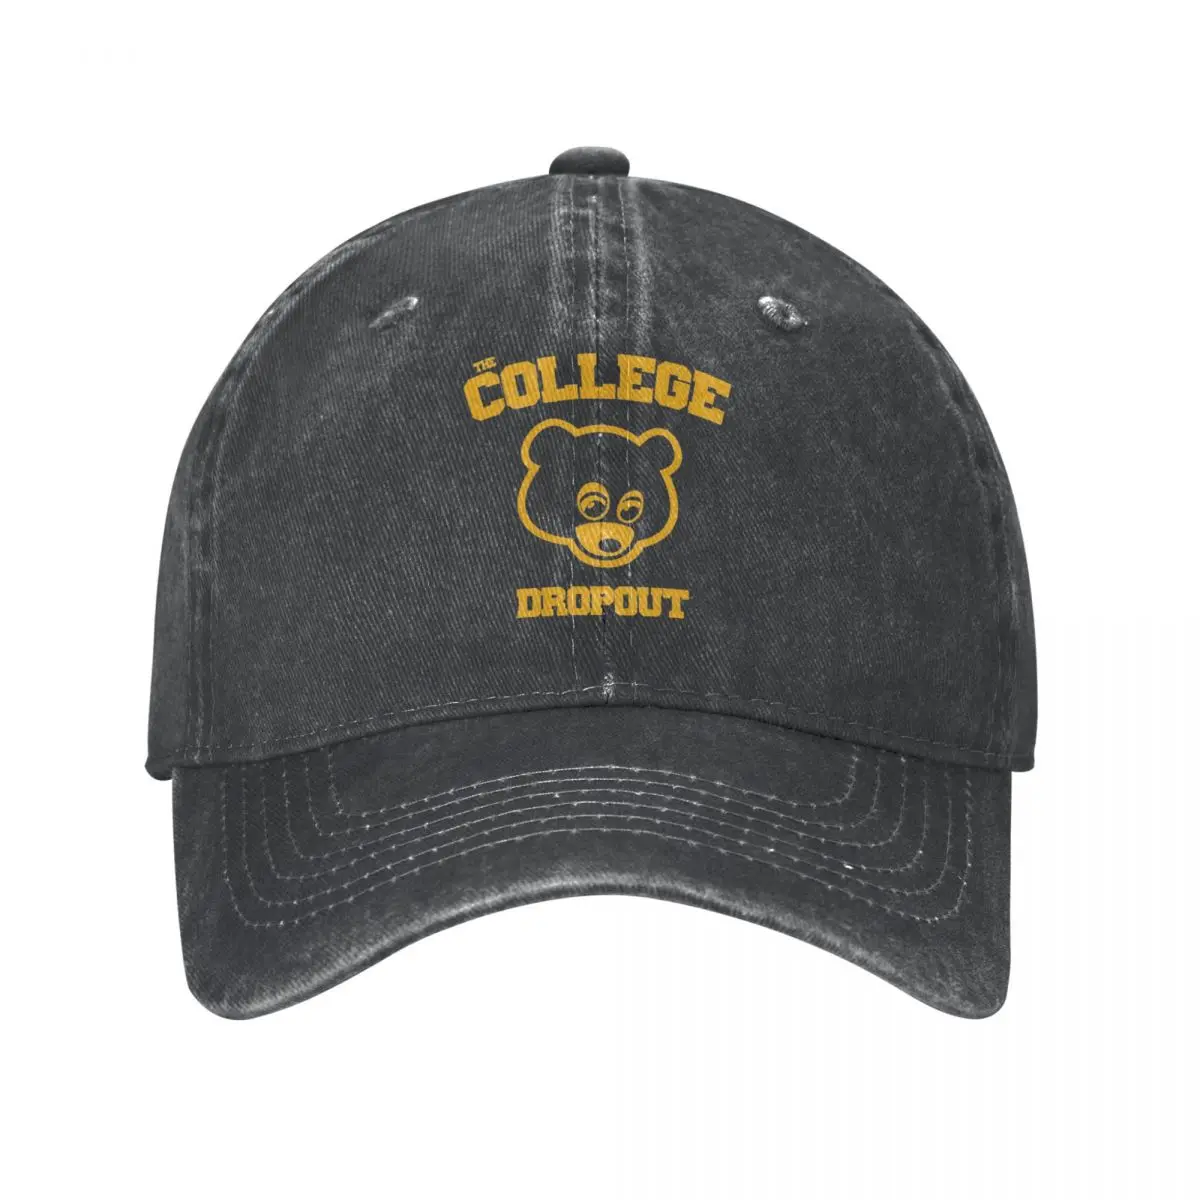 

Vintage The College Dropout Kanye West Baseball Cap Unisex Style Distressed Denim Sun Cap Outdoor All Seasons Travel Hats Cap